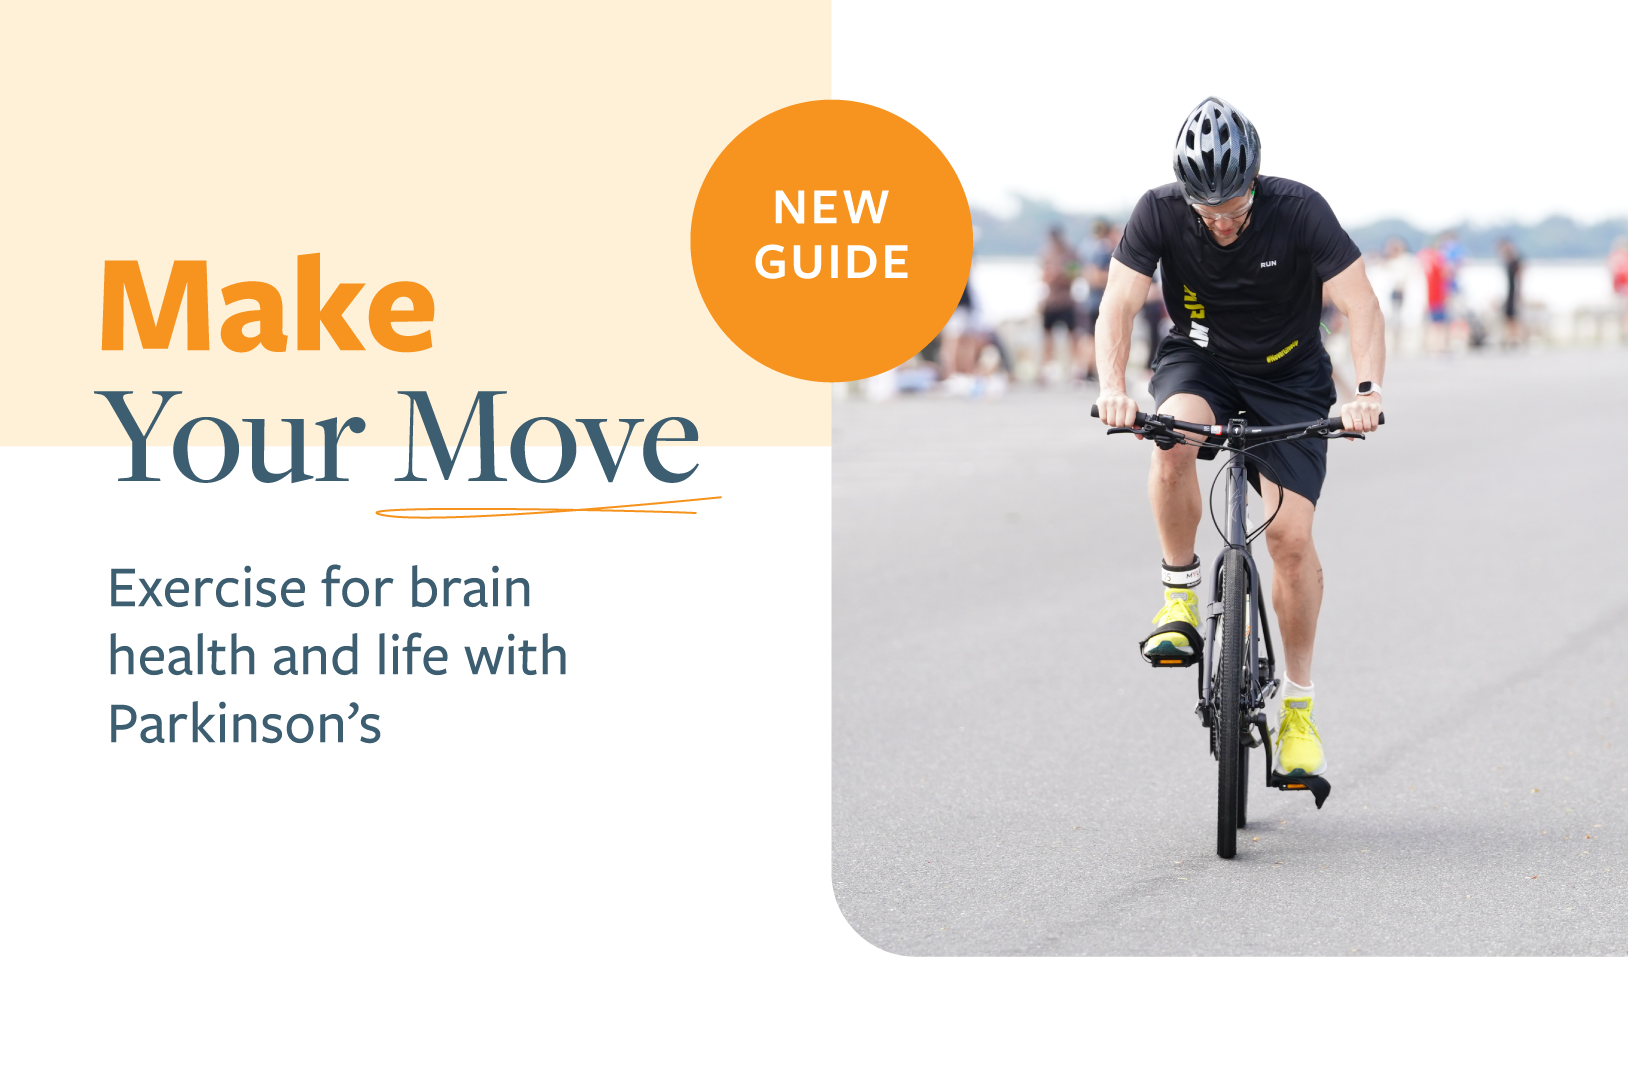 Make Your Move. Exercise for brain health and life with Parkinson's. Download the new guide.